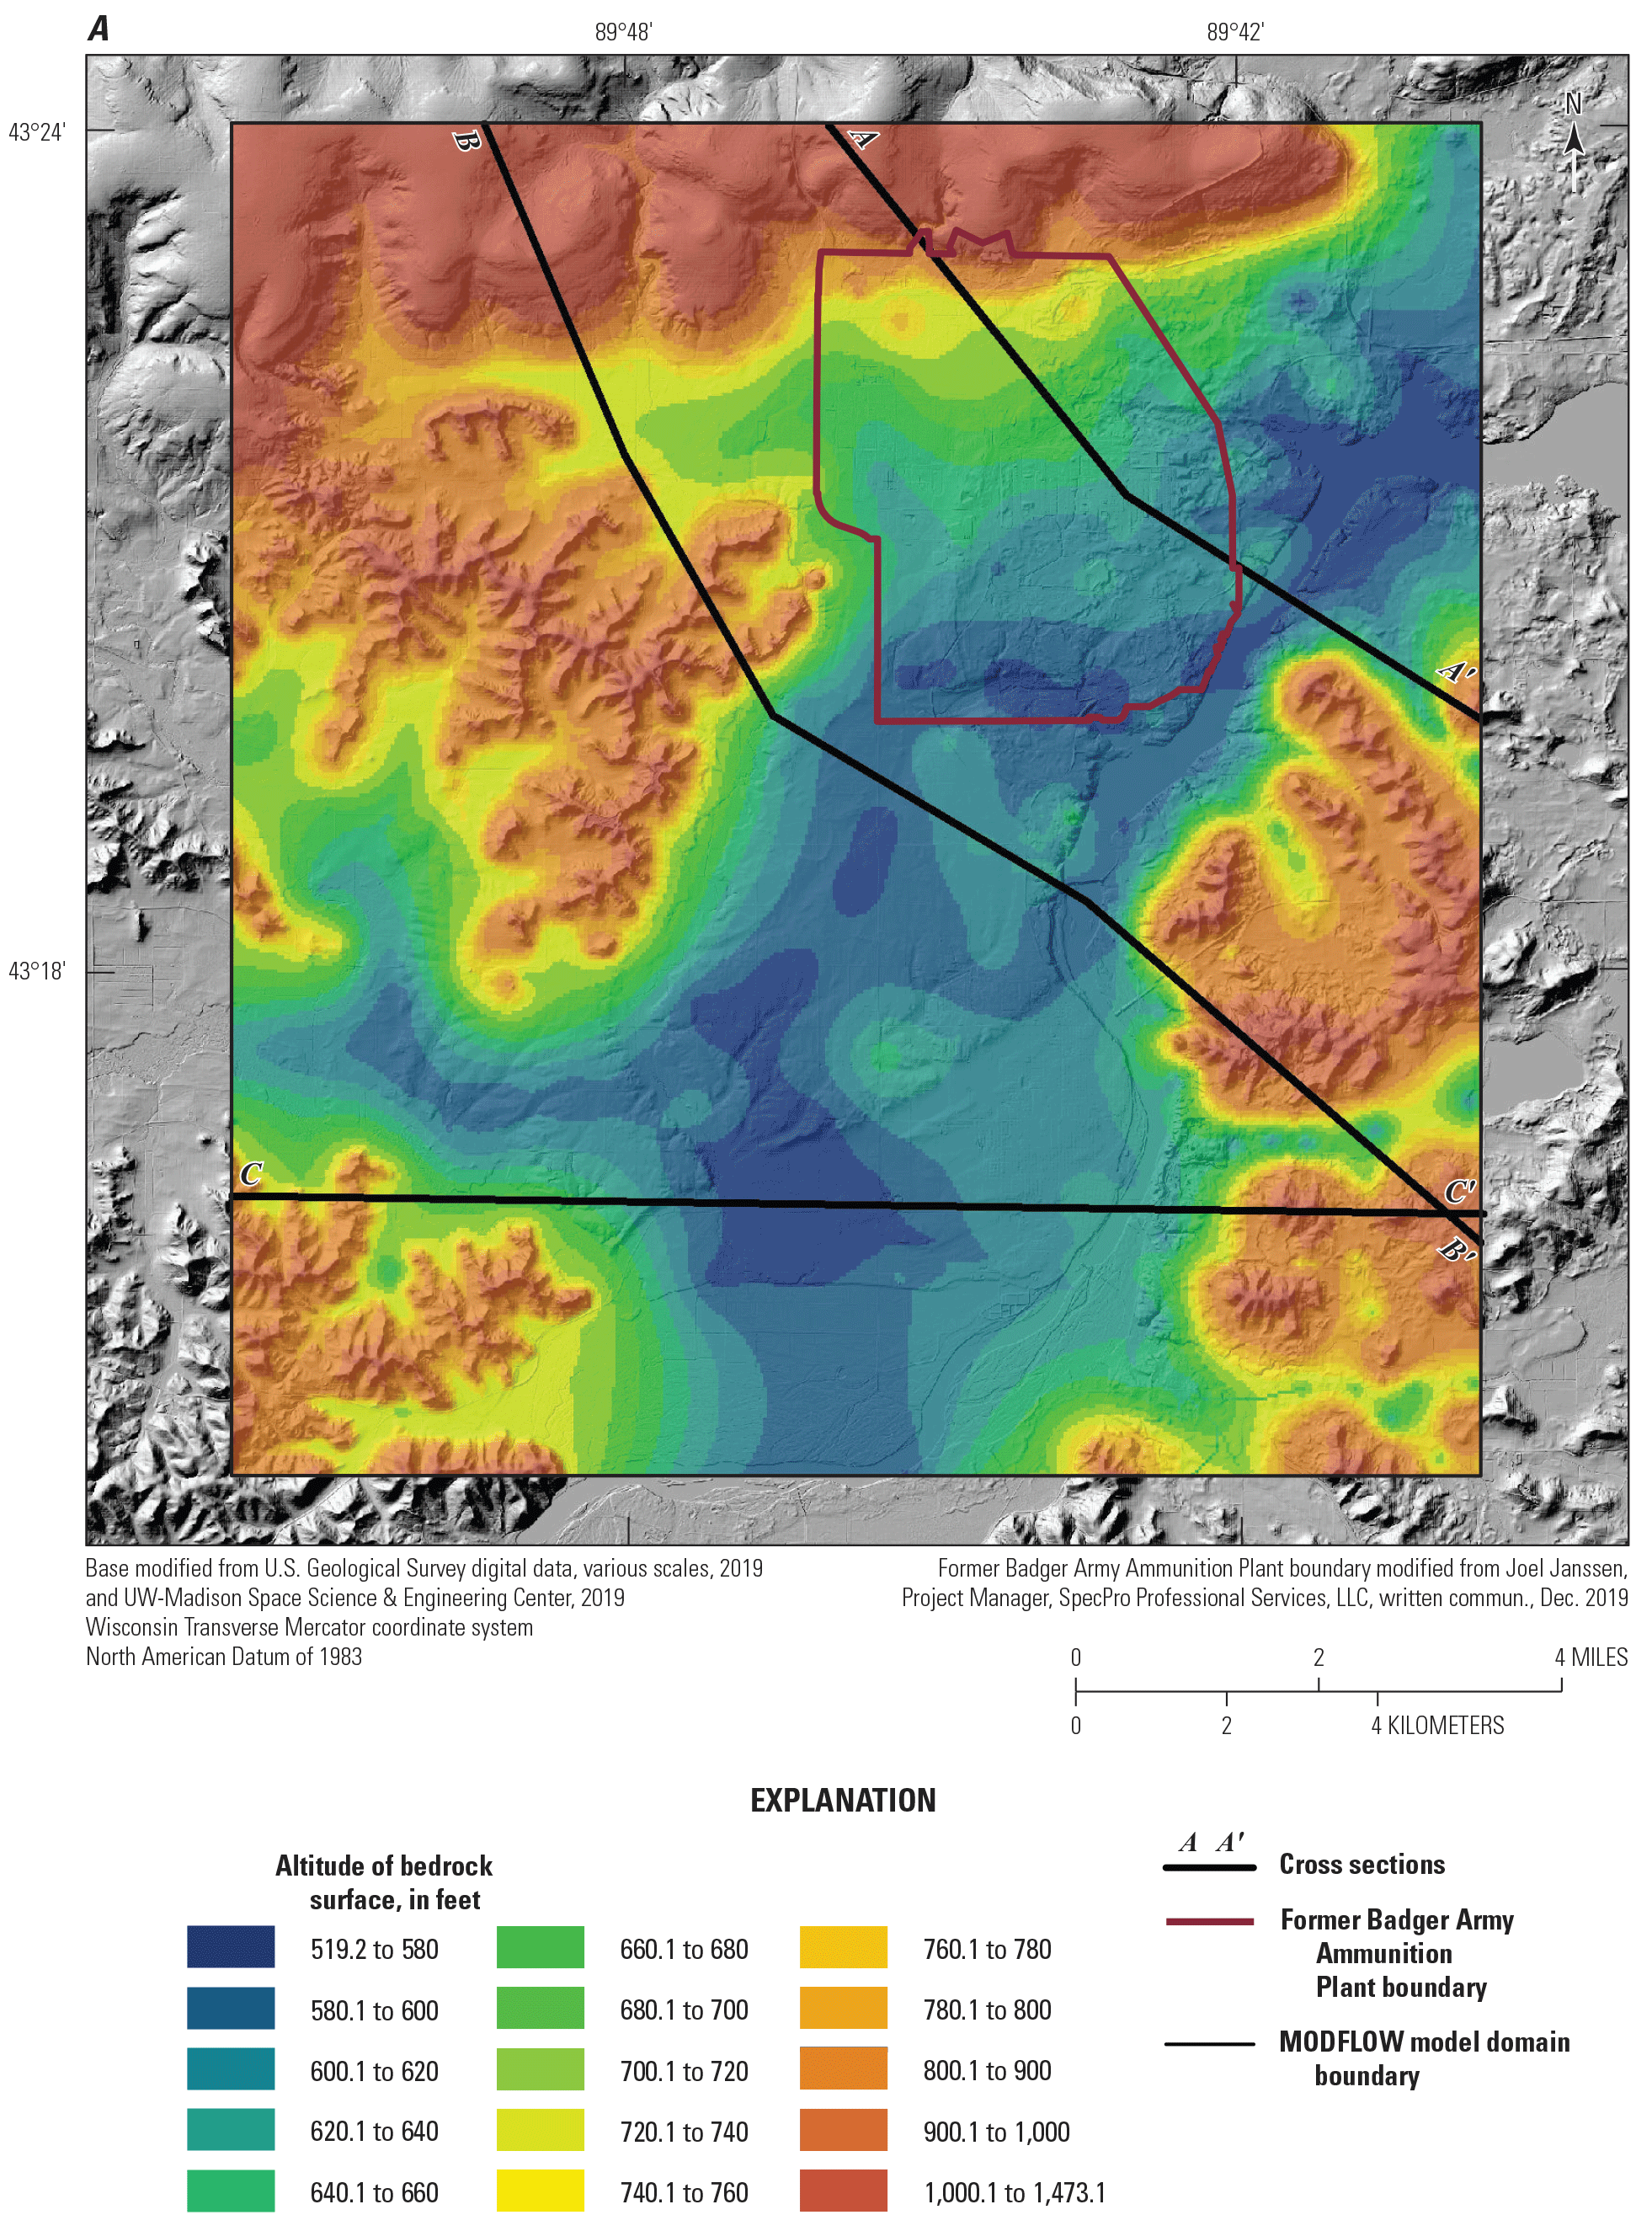 Altitude of bedrock ranged from 519.2 to 1,473.1 feet. Model layers 11–14 were generally
                        thicker than layers 1–10.